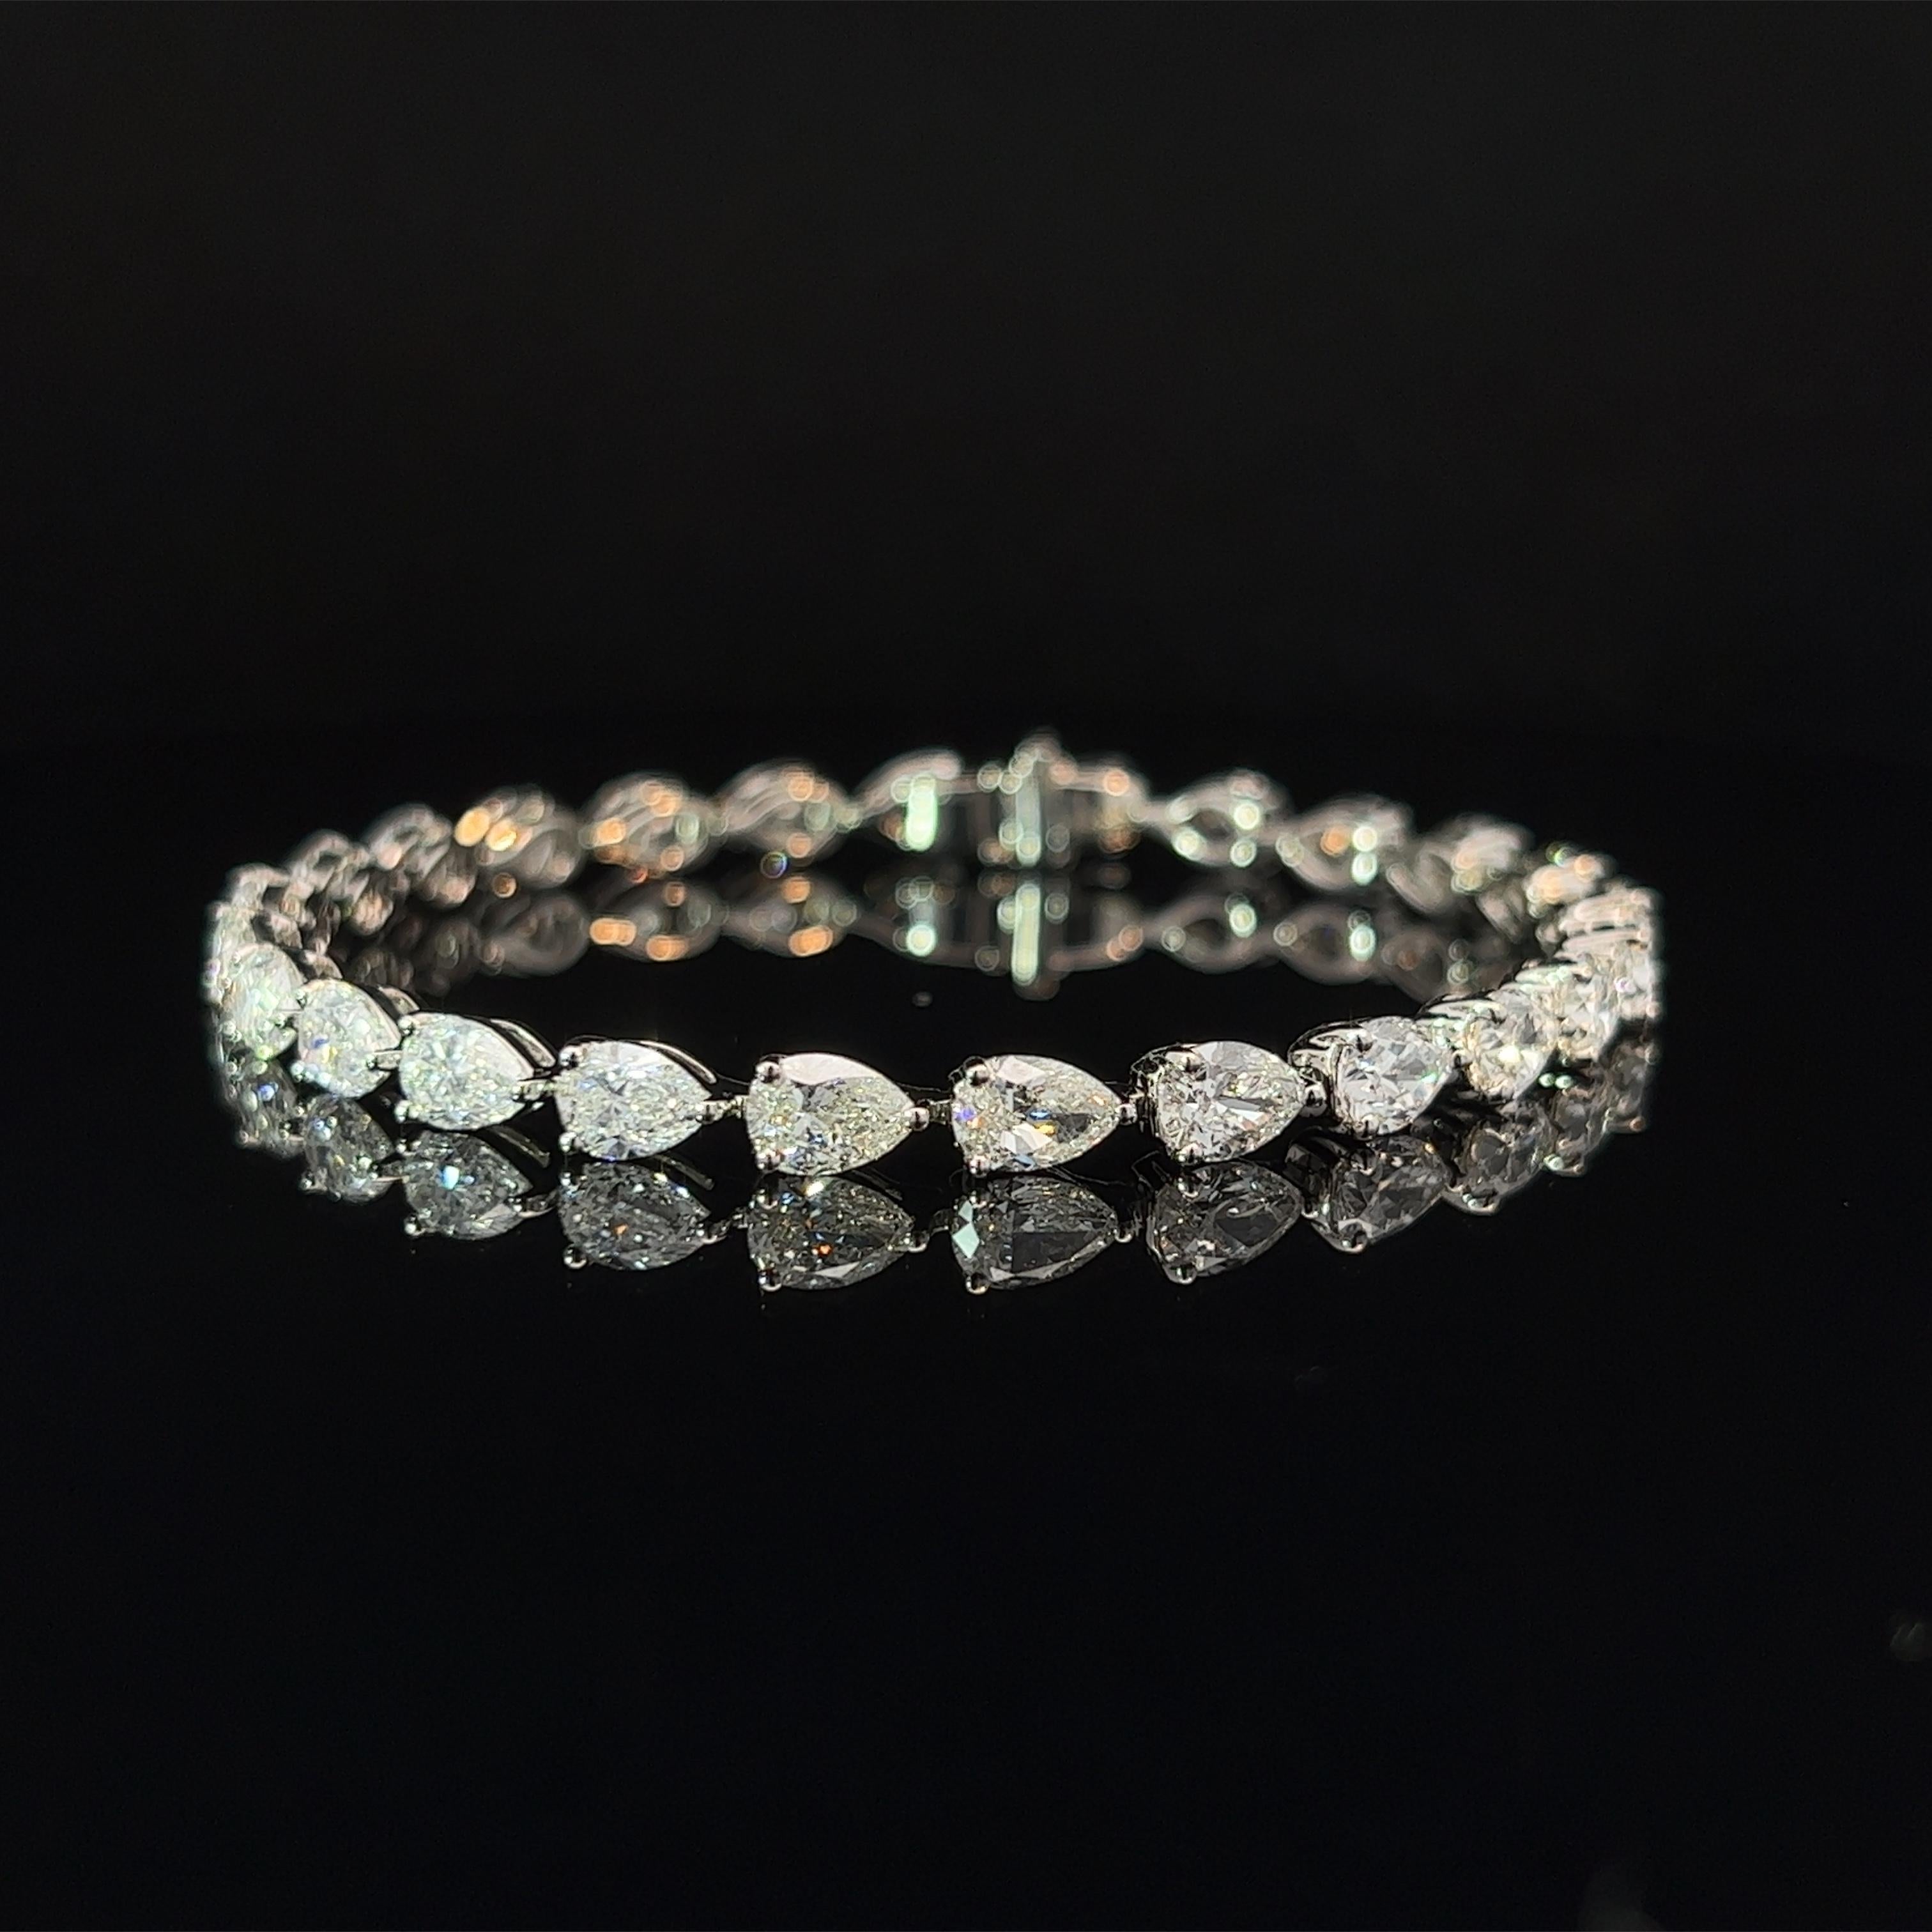 Diamond Shape: Pear Cut 
Total Diamond Weight: 12.61ct
Individual Diamond Weight: .50ct
Color/Clarity: FG VS  
Metal: Platinum 950
Metal Weight: 15.18g 

Key Features:

Pear-Cut Diamonds: The centerpiece of this bracelet features a dazzling array of